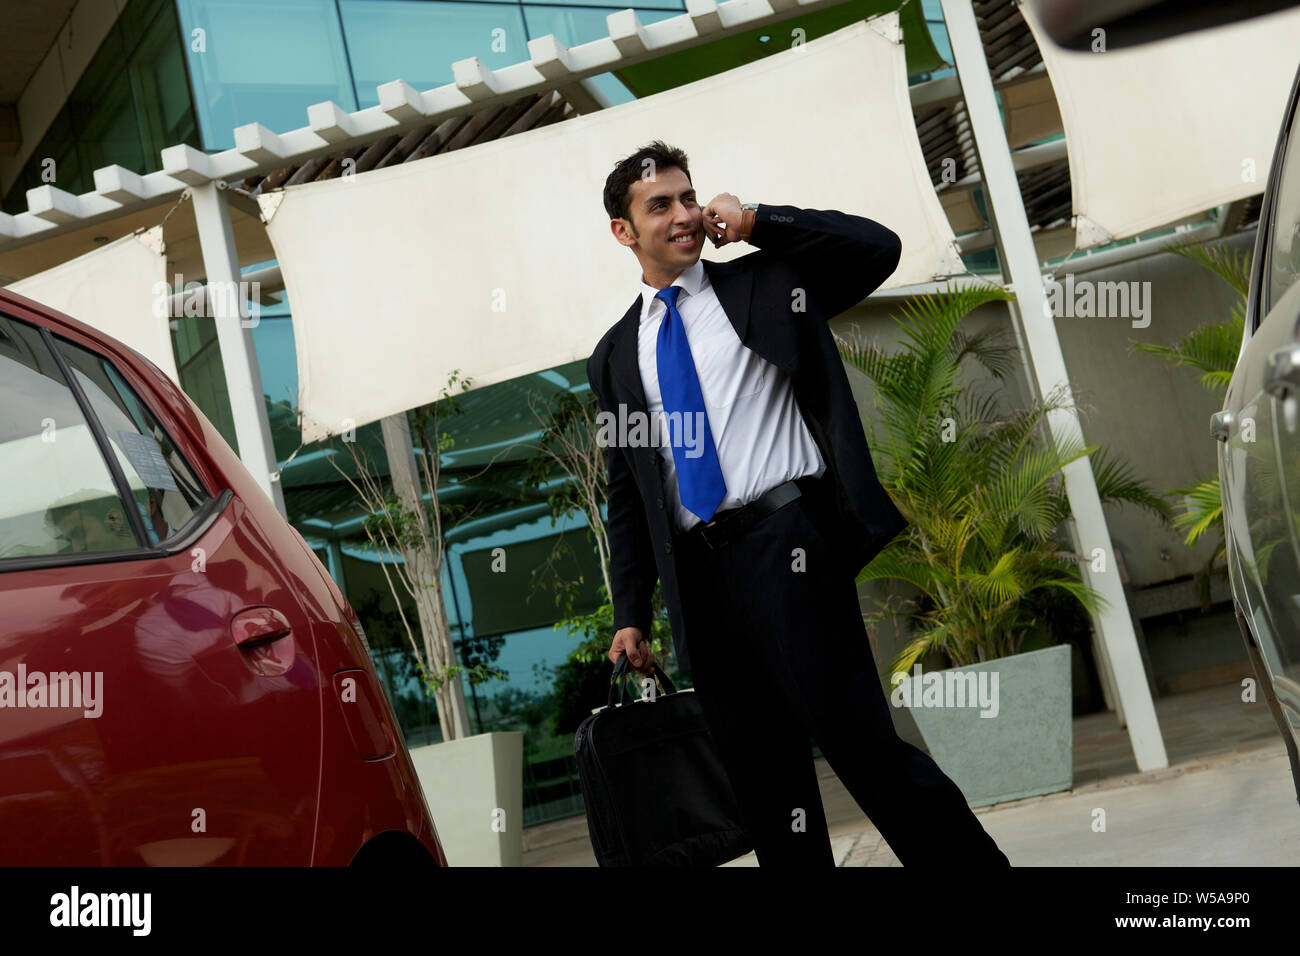 Businessman talking on mobile phone with bag Stock Photo